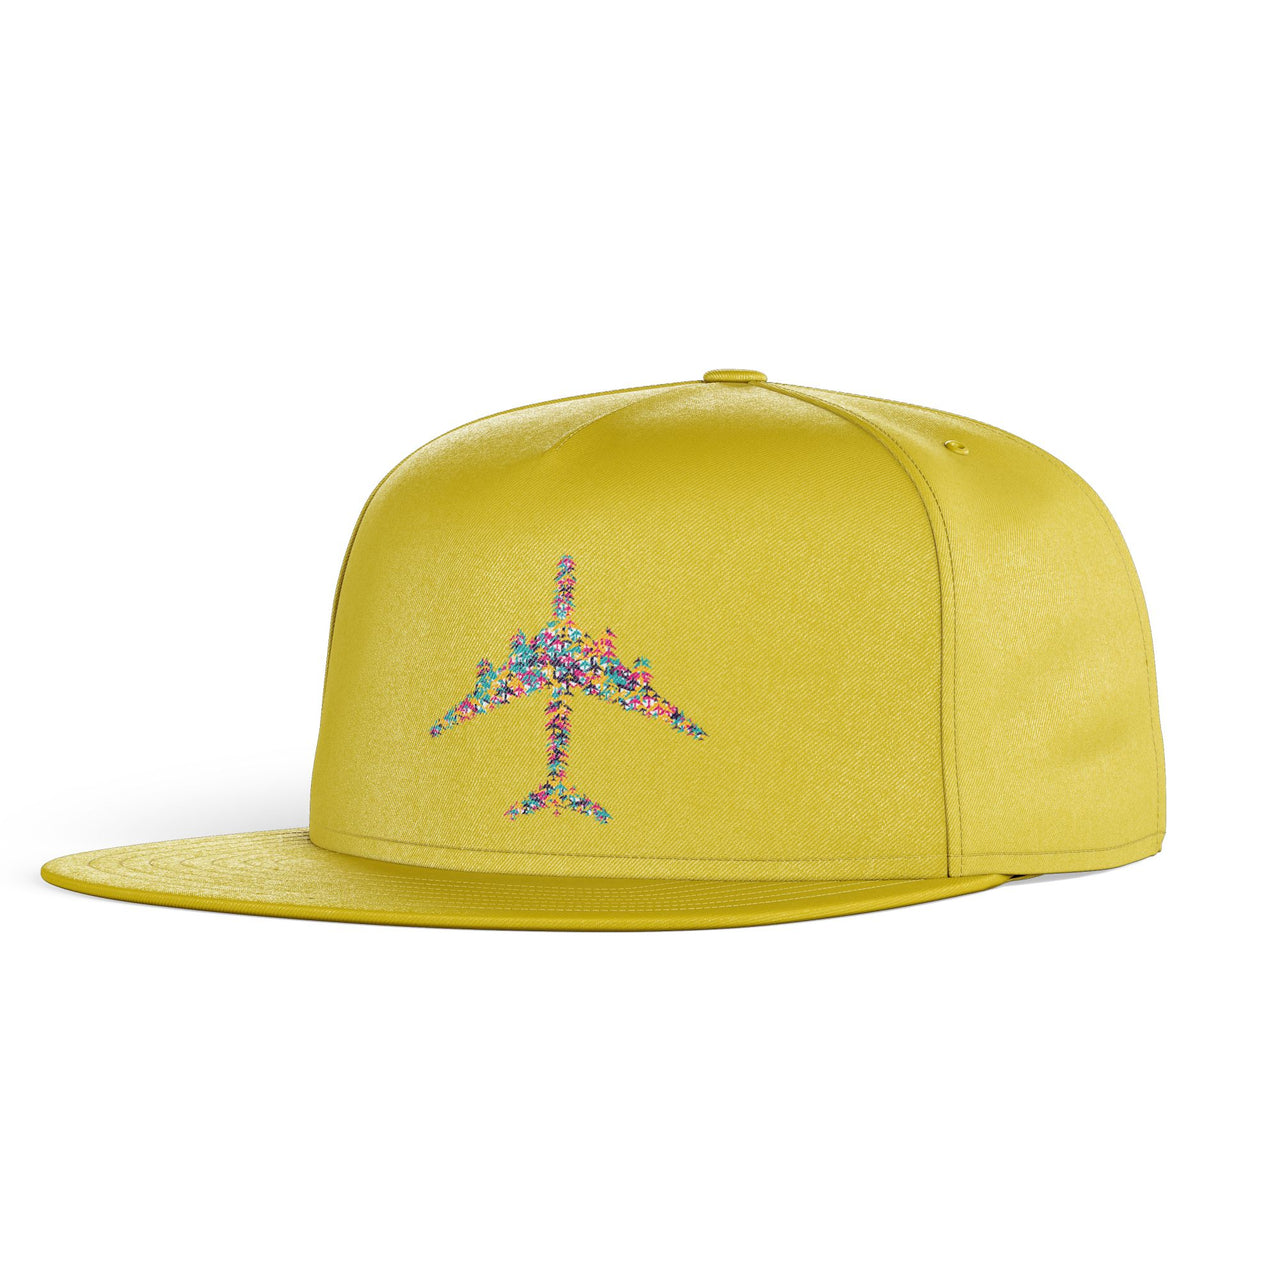 Colourful Airplane Designed Snapback Caps & Hats